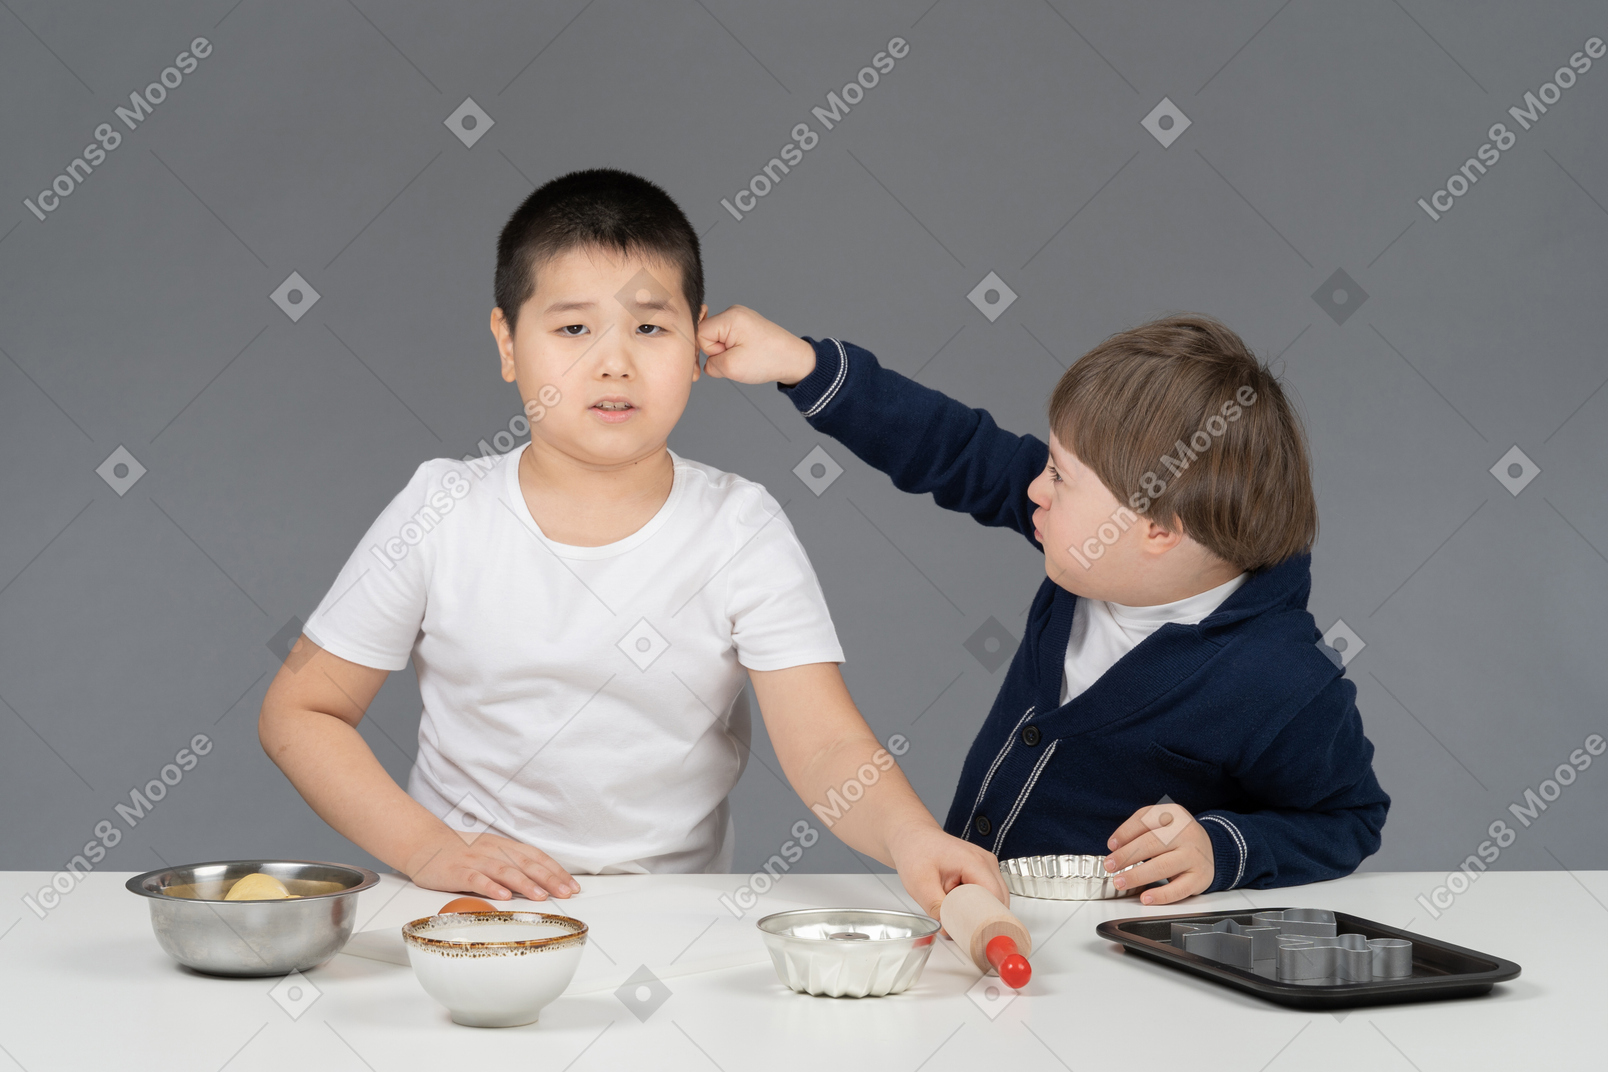 Two little boys having fun while cooking